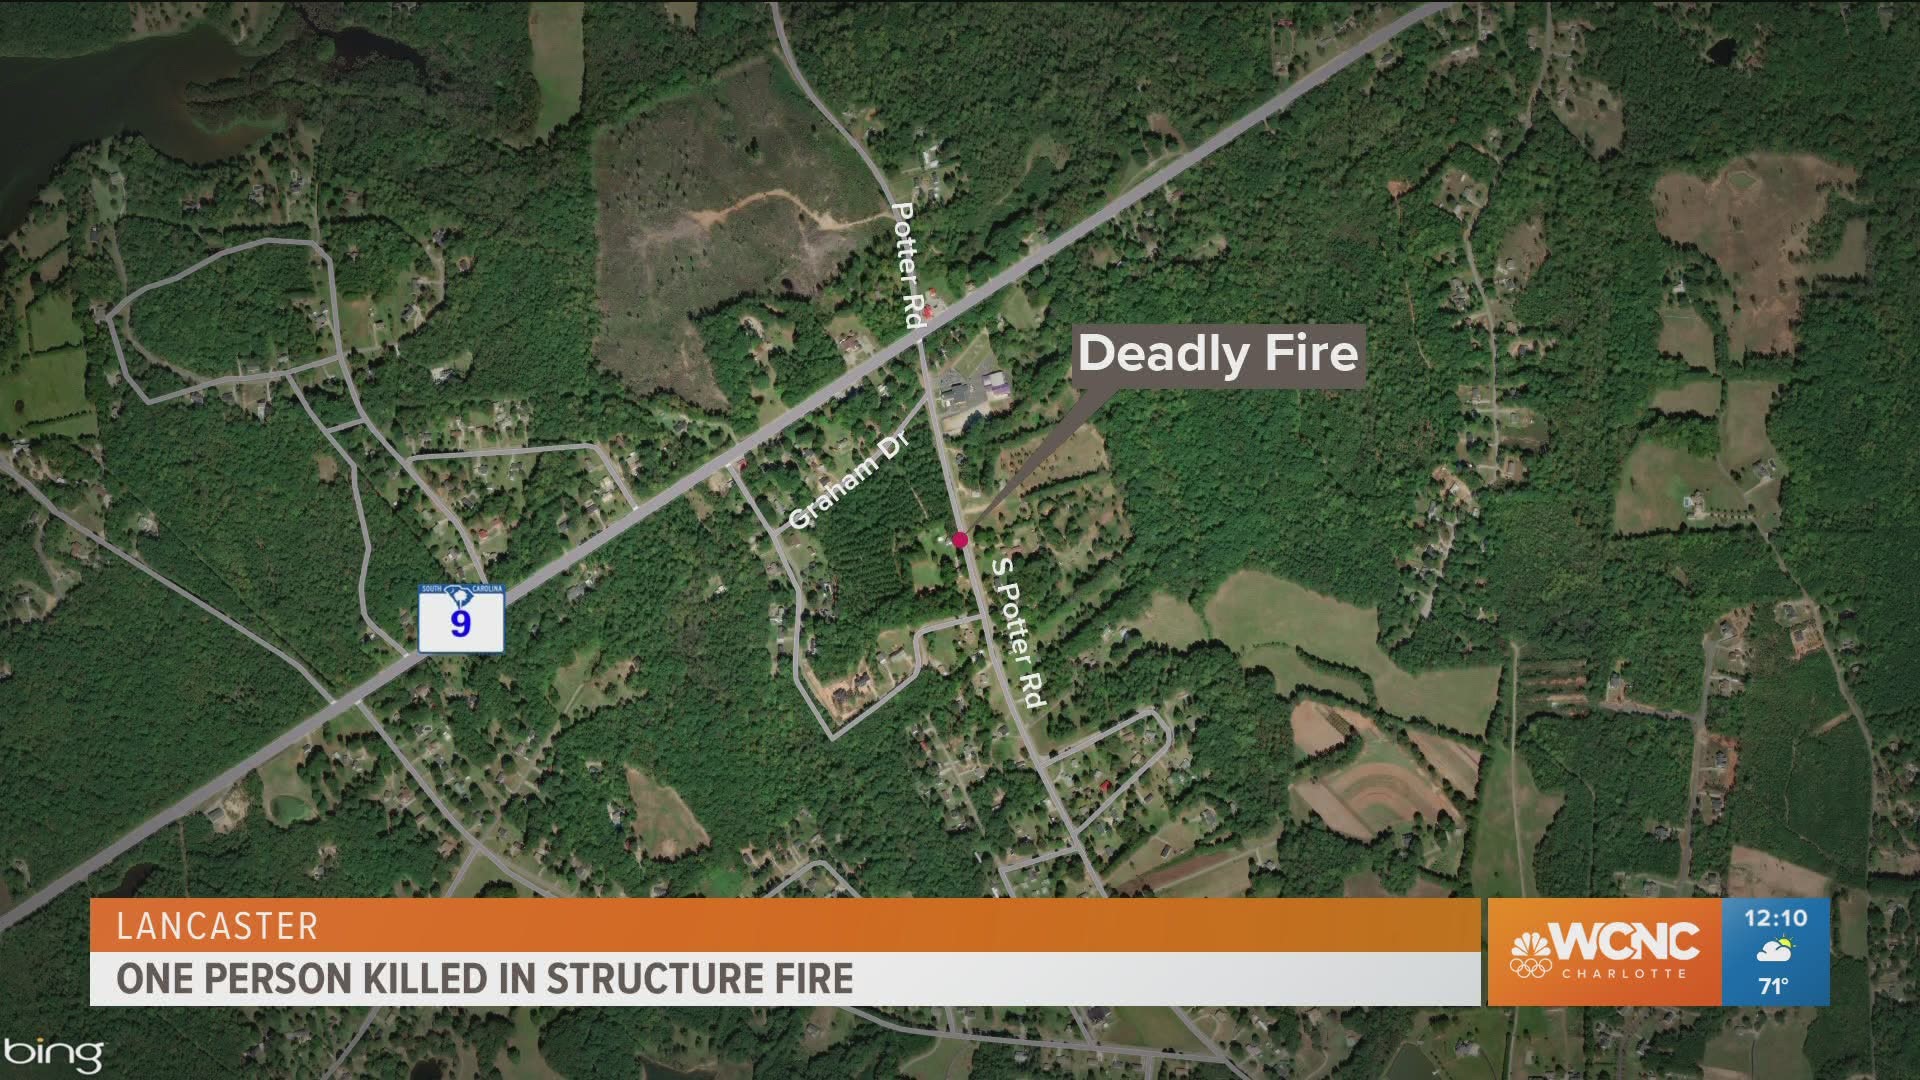 Officials in Lancaster County, South Carolina are investigating after one person died in an early morning house fire Friday.